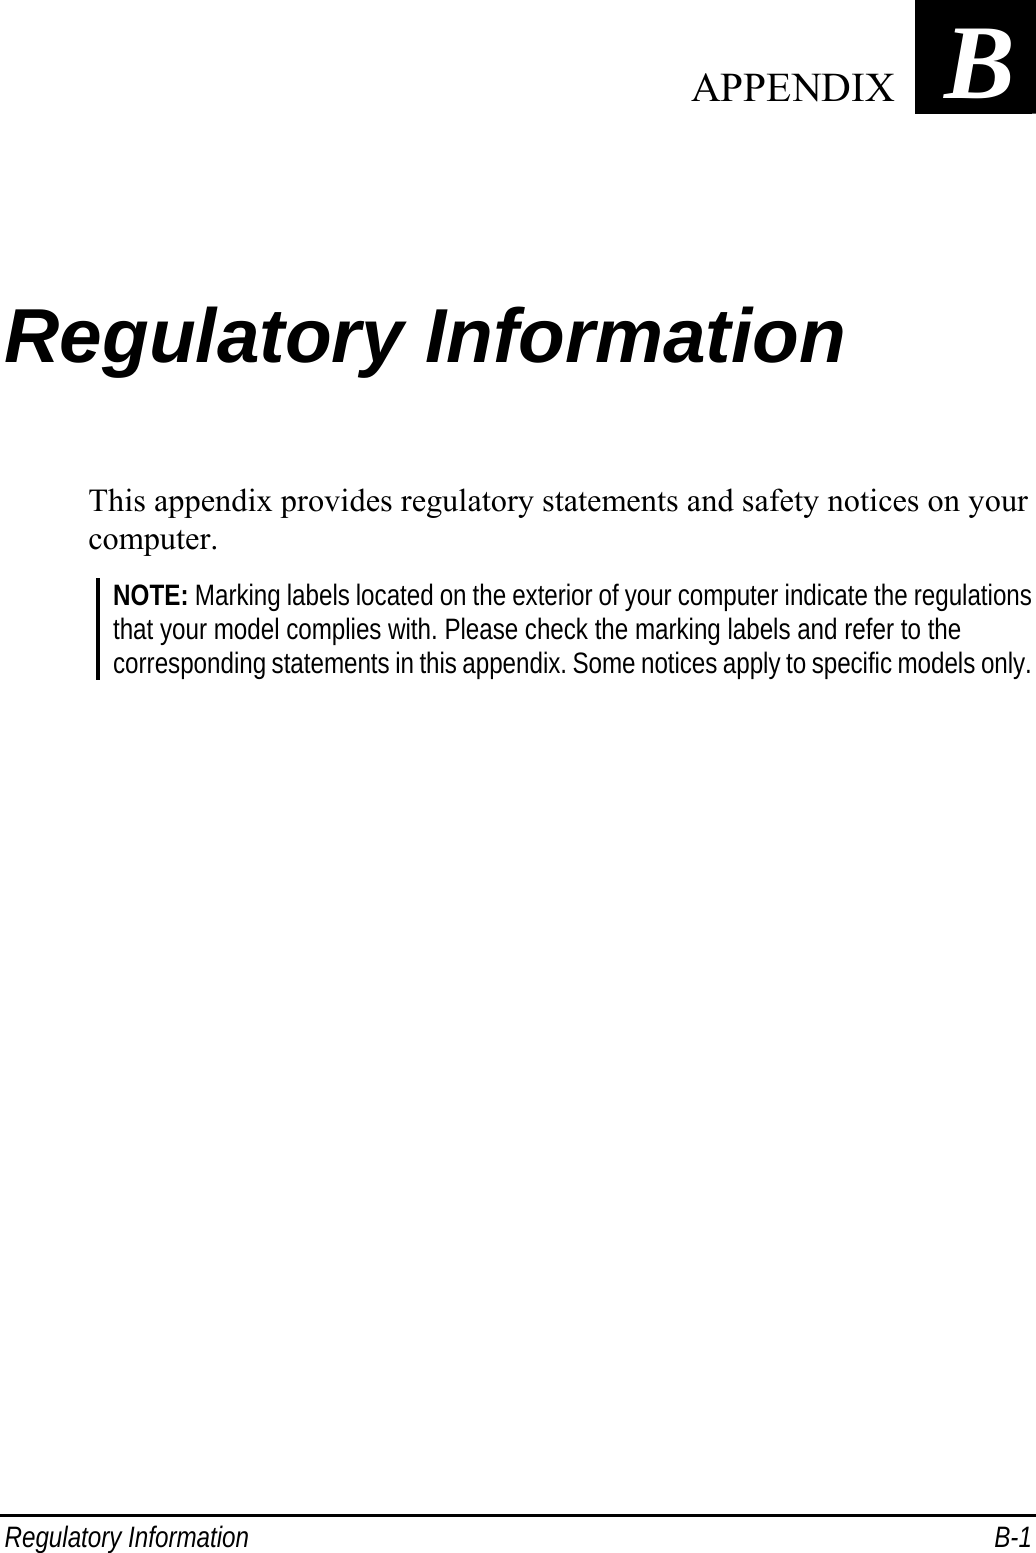  Regulatory Information  B-1 Appendix   BRegulatory Information This appendix provides regulatory statements and safety notices on your computer. NOTE: Marking labels located on the exterior of your computer indicate the regulations that your model complies with. Please check the marking labels and refer to the corresponding statements in this appendix. Some notices apply to specific models only.   APPENDIX 